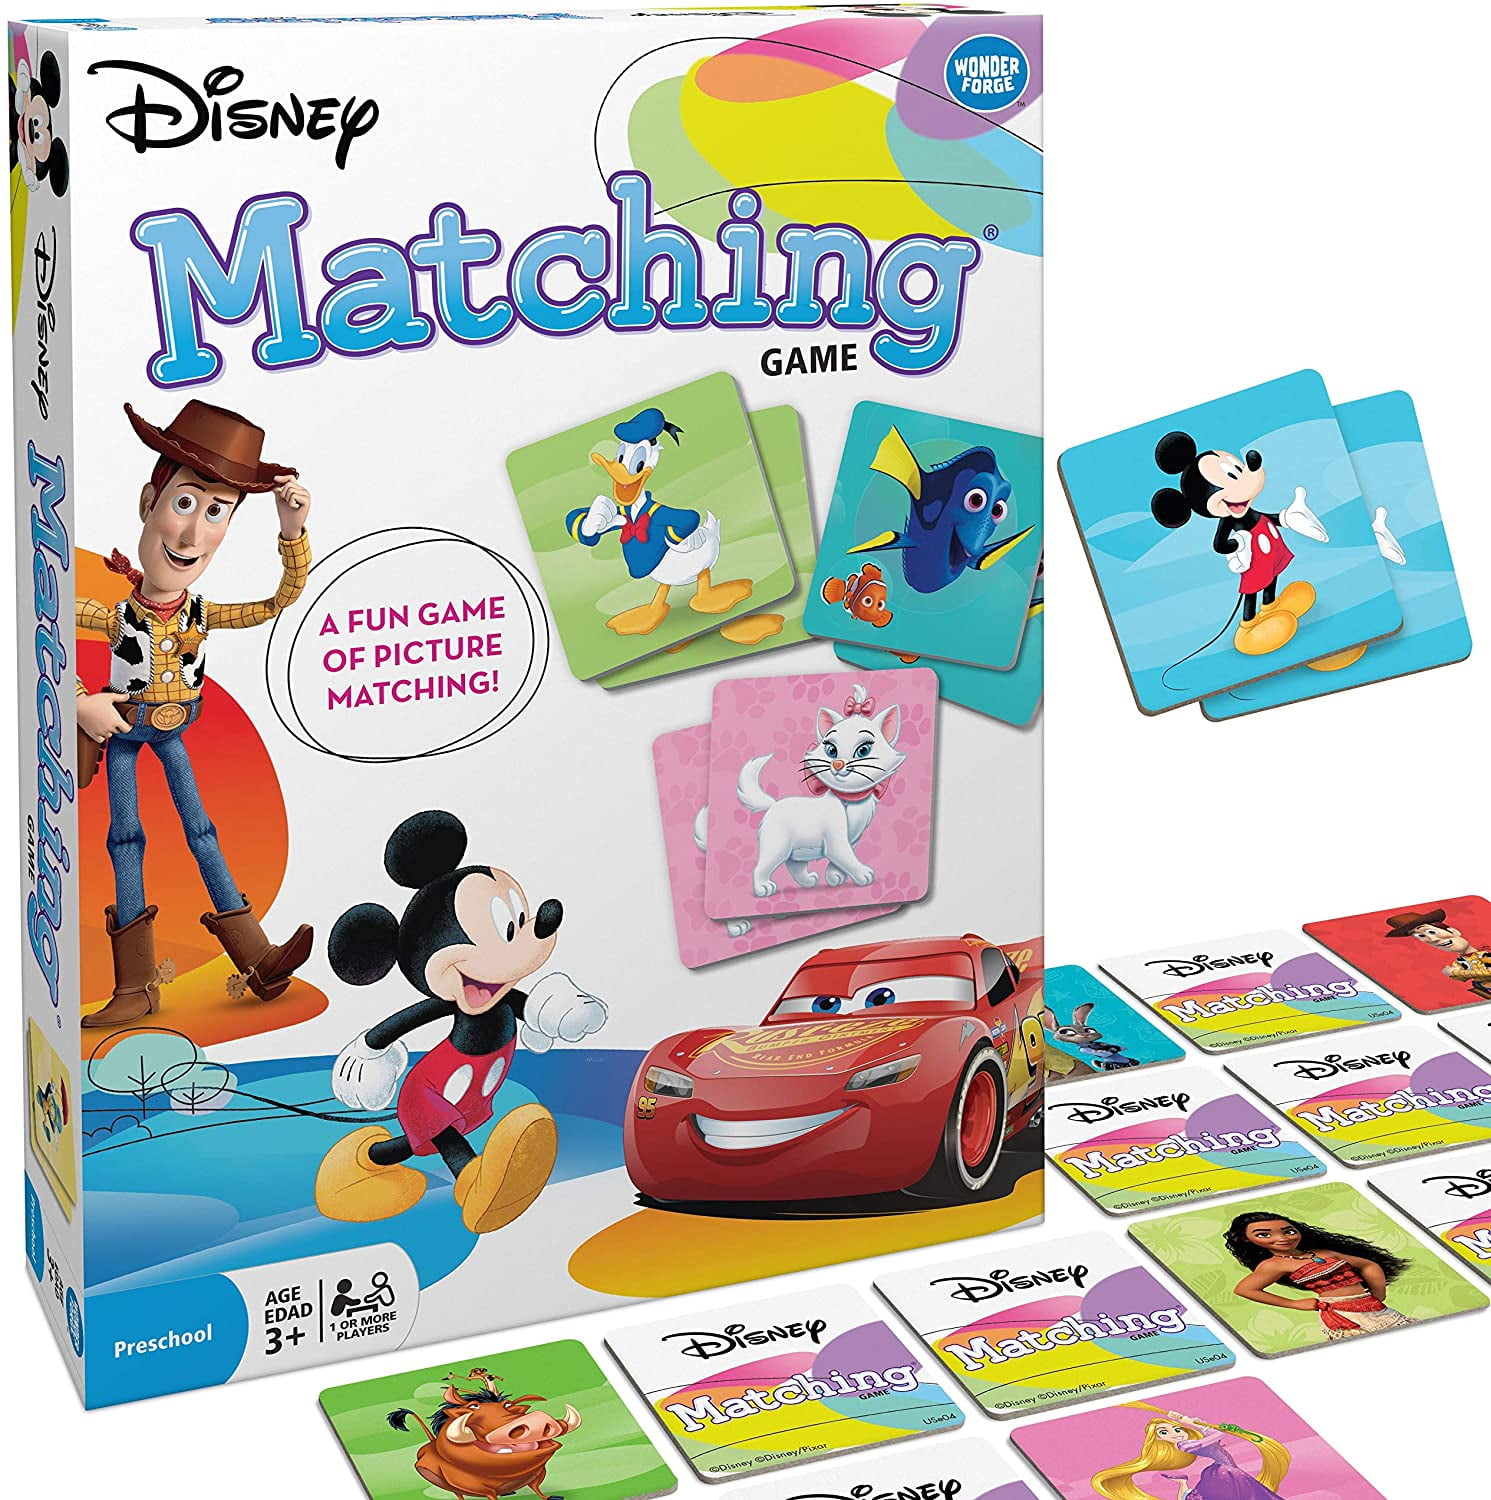 Memory Game 2002 The Disney Edition Classic Matching Magically Fun